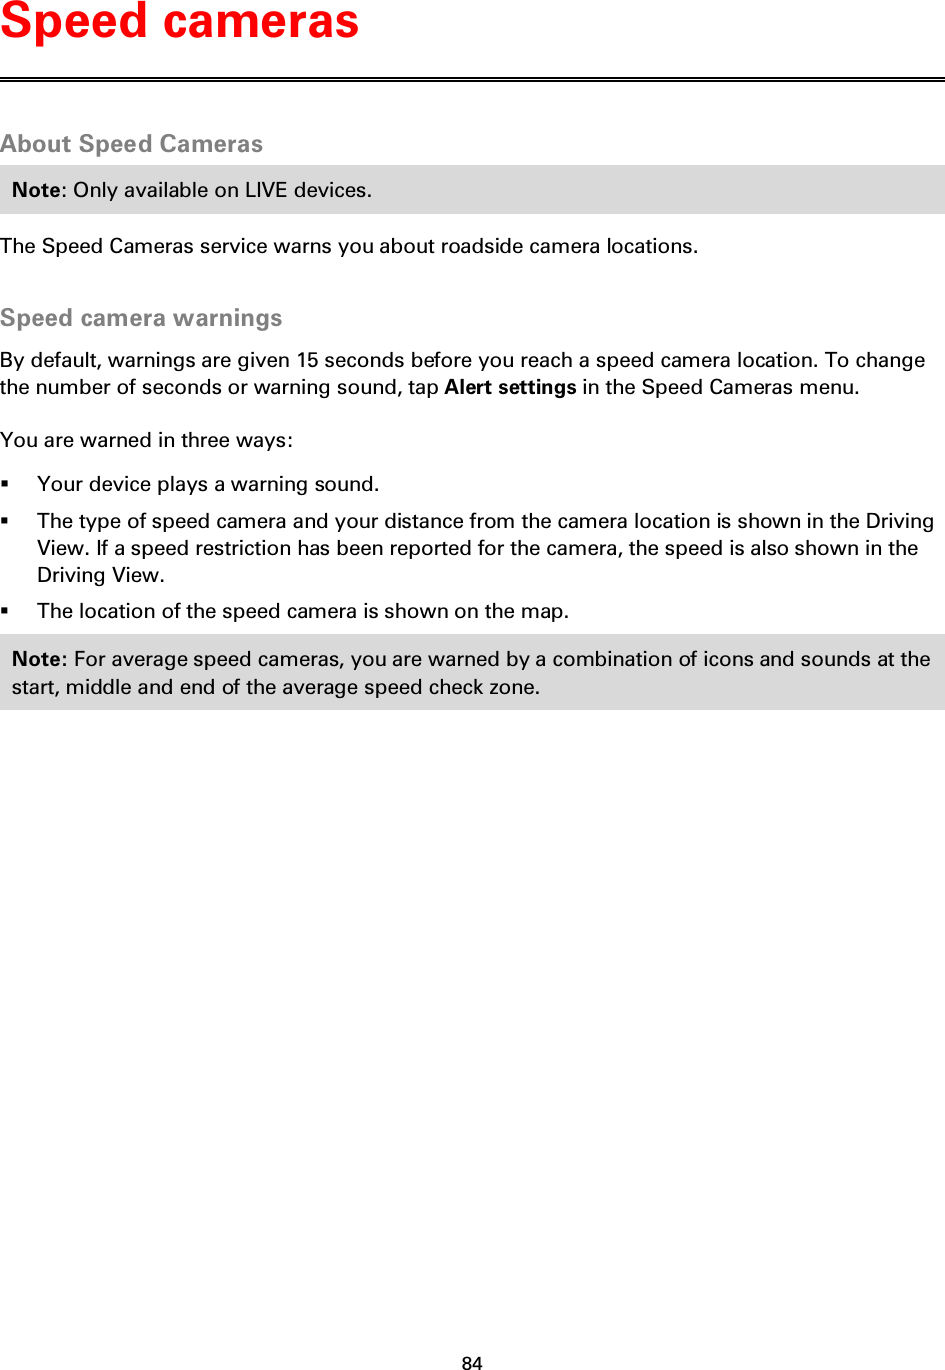 84    About Speed Cameras Note: Only available on LIVE devices. The Speed Cameras service warns you about roadside camera locations.  Speed camera warnings By default, warnings are given 15 seconds before you reach a speed camera location. To change the number of seconds or warning sound, tap Alert settings in the Speed Cameras menu. You are warned in three ways:  Your device plays a warning sound.  The type of speed camera and your distance from the camera location is shown in the Driving View. If a speed restriction has been reported for the camera, the speed is also shown in the Driving View.  The location of the speed camera is shown on the map. Note: For average speed cameras, you are warned by a combination of icons and sounds at the start, middle and end of the average speed check zone.  Speed cameras 